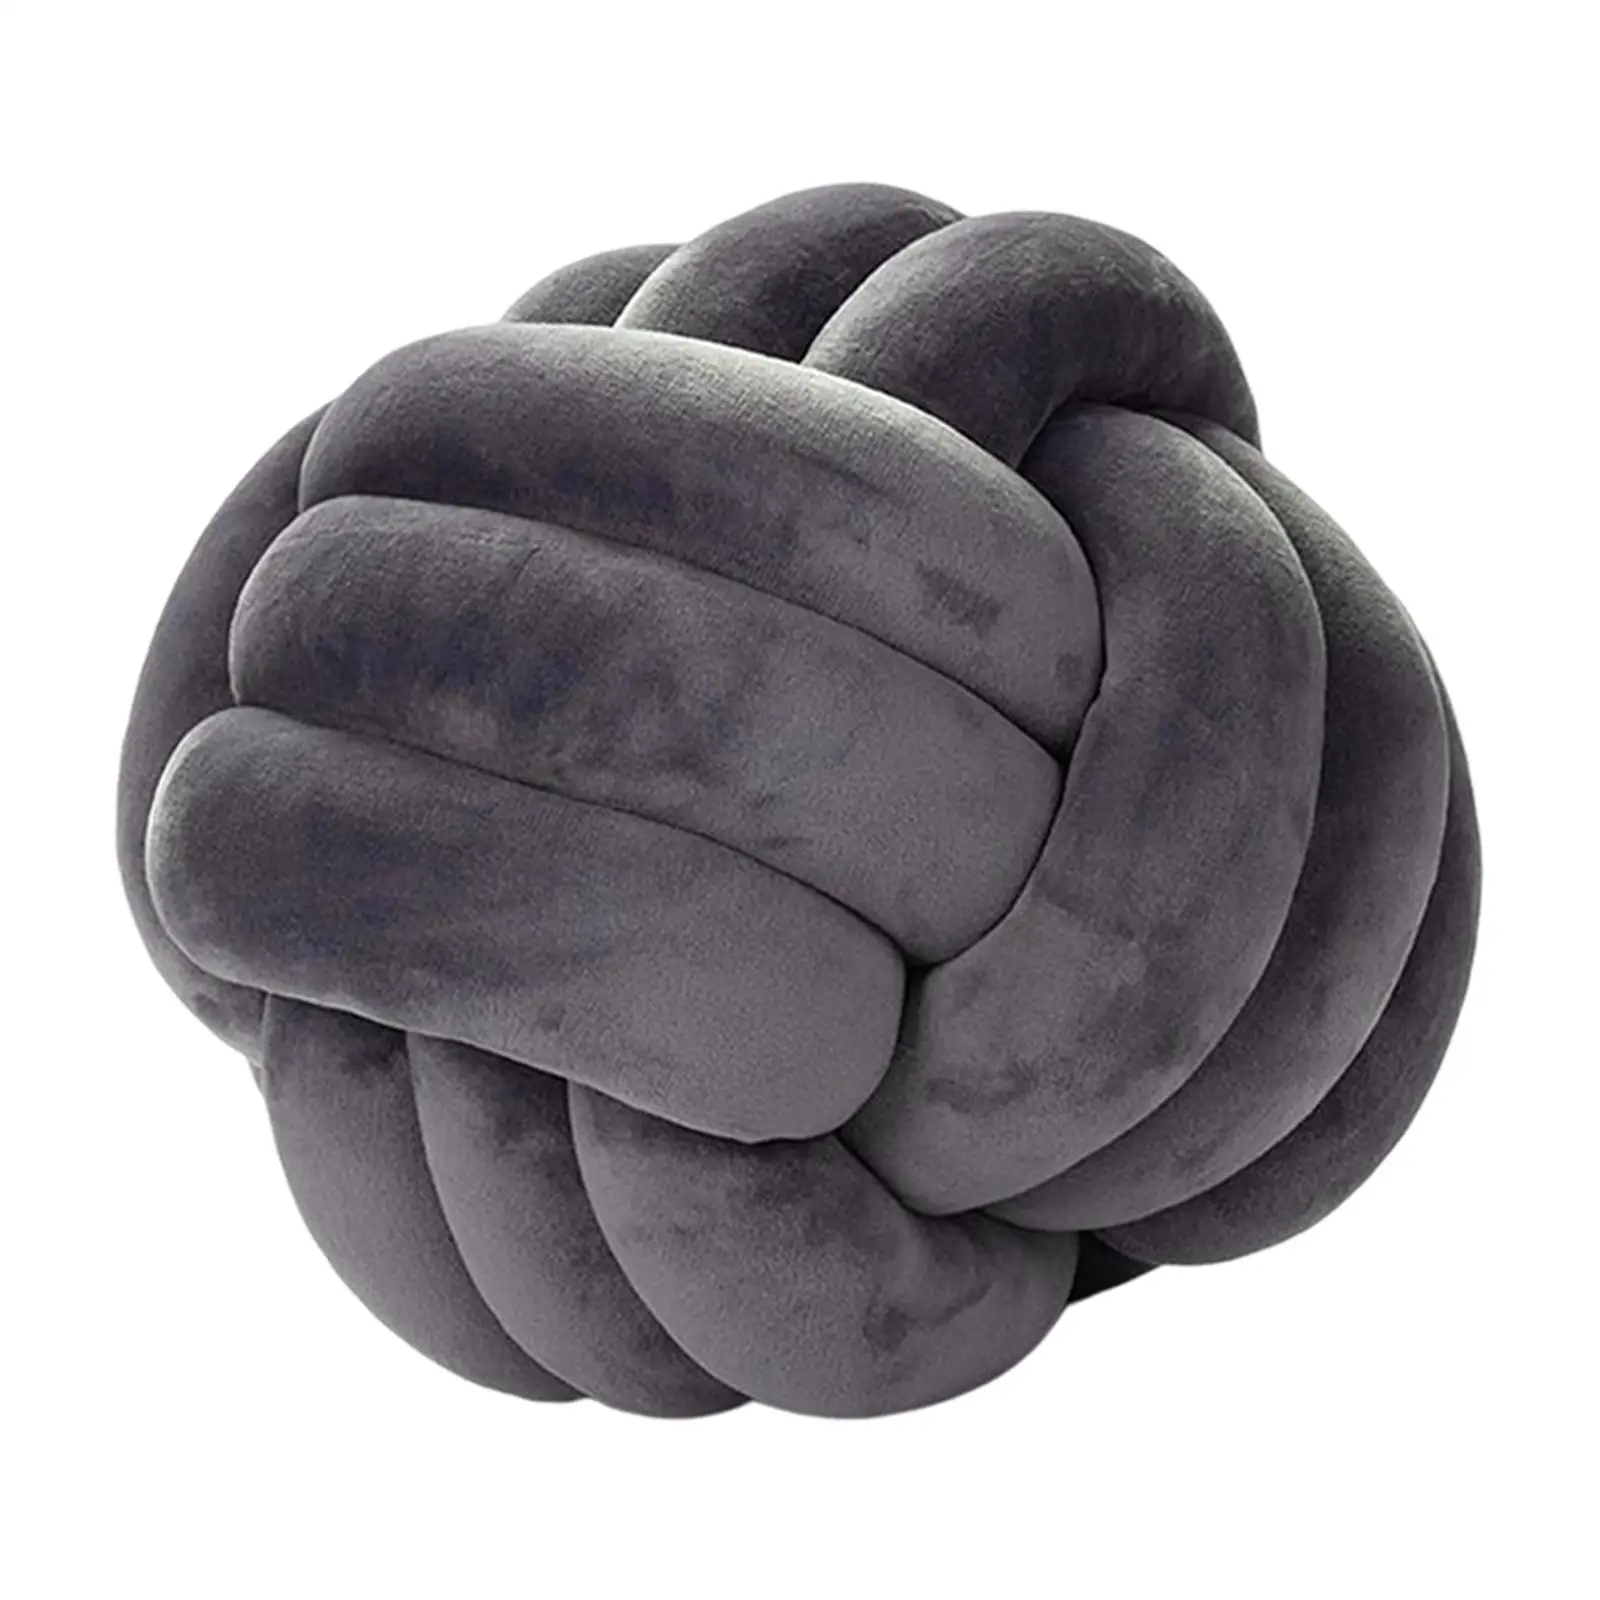 Round Knot Ball Pillow Throw Knotted Pillow Handmade Decorative for Chairs Home Decoration